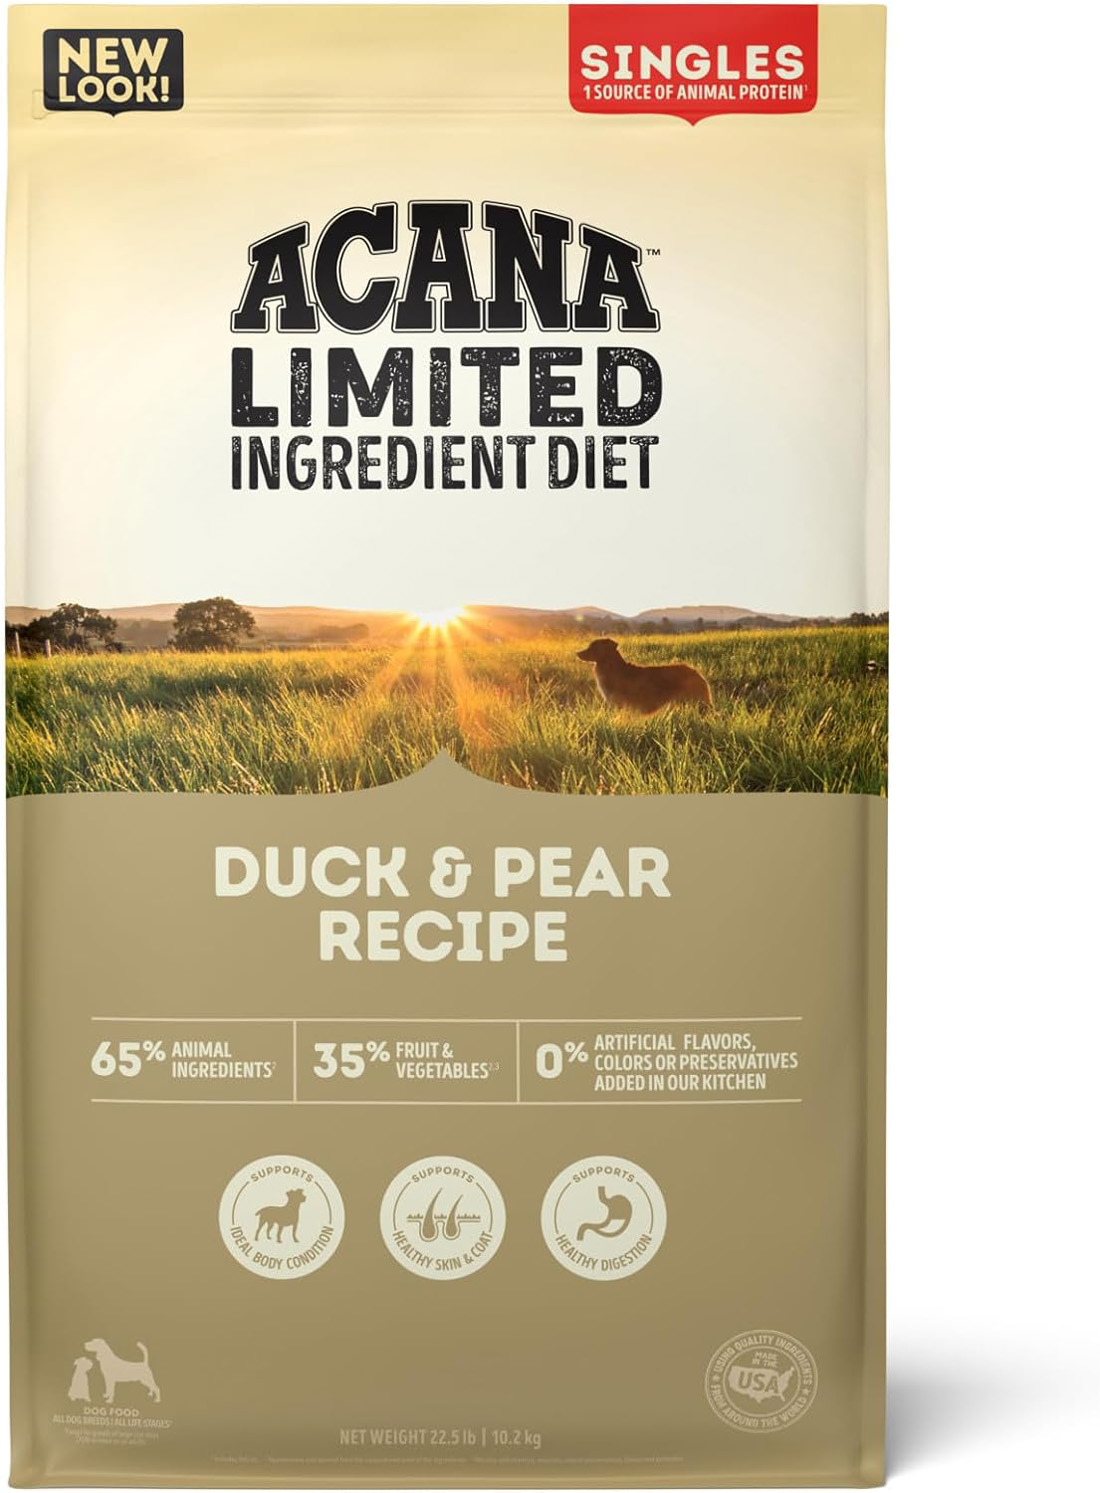 ACANA Grain Free, Singles Limited Ingredient, High Protein, Duck & Pear Dry Dog Food